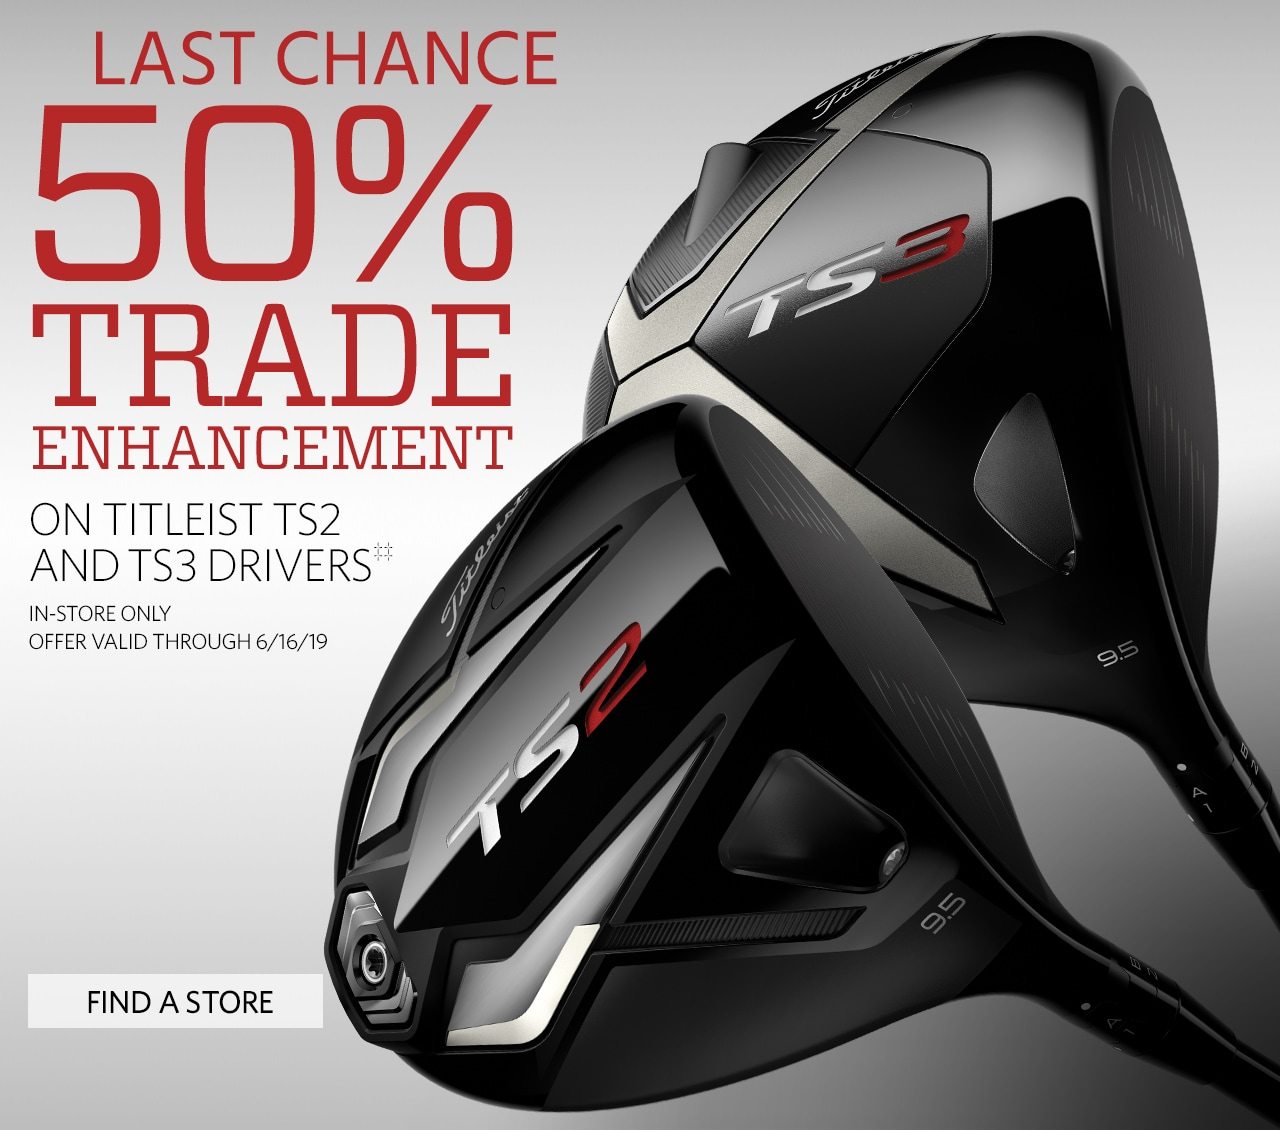 Last Chance to Earn a 50% Trade Enhancement on Titleist TS2 and TS3 Drivers